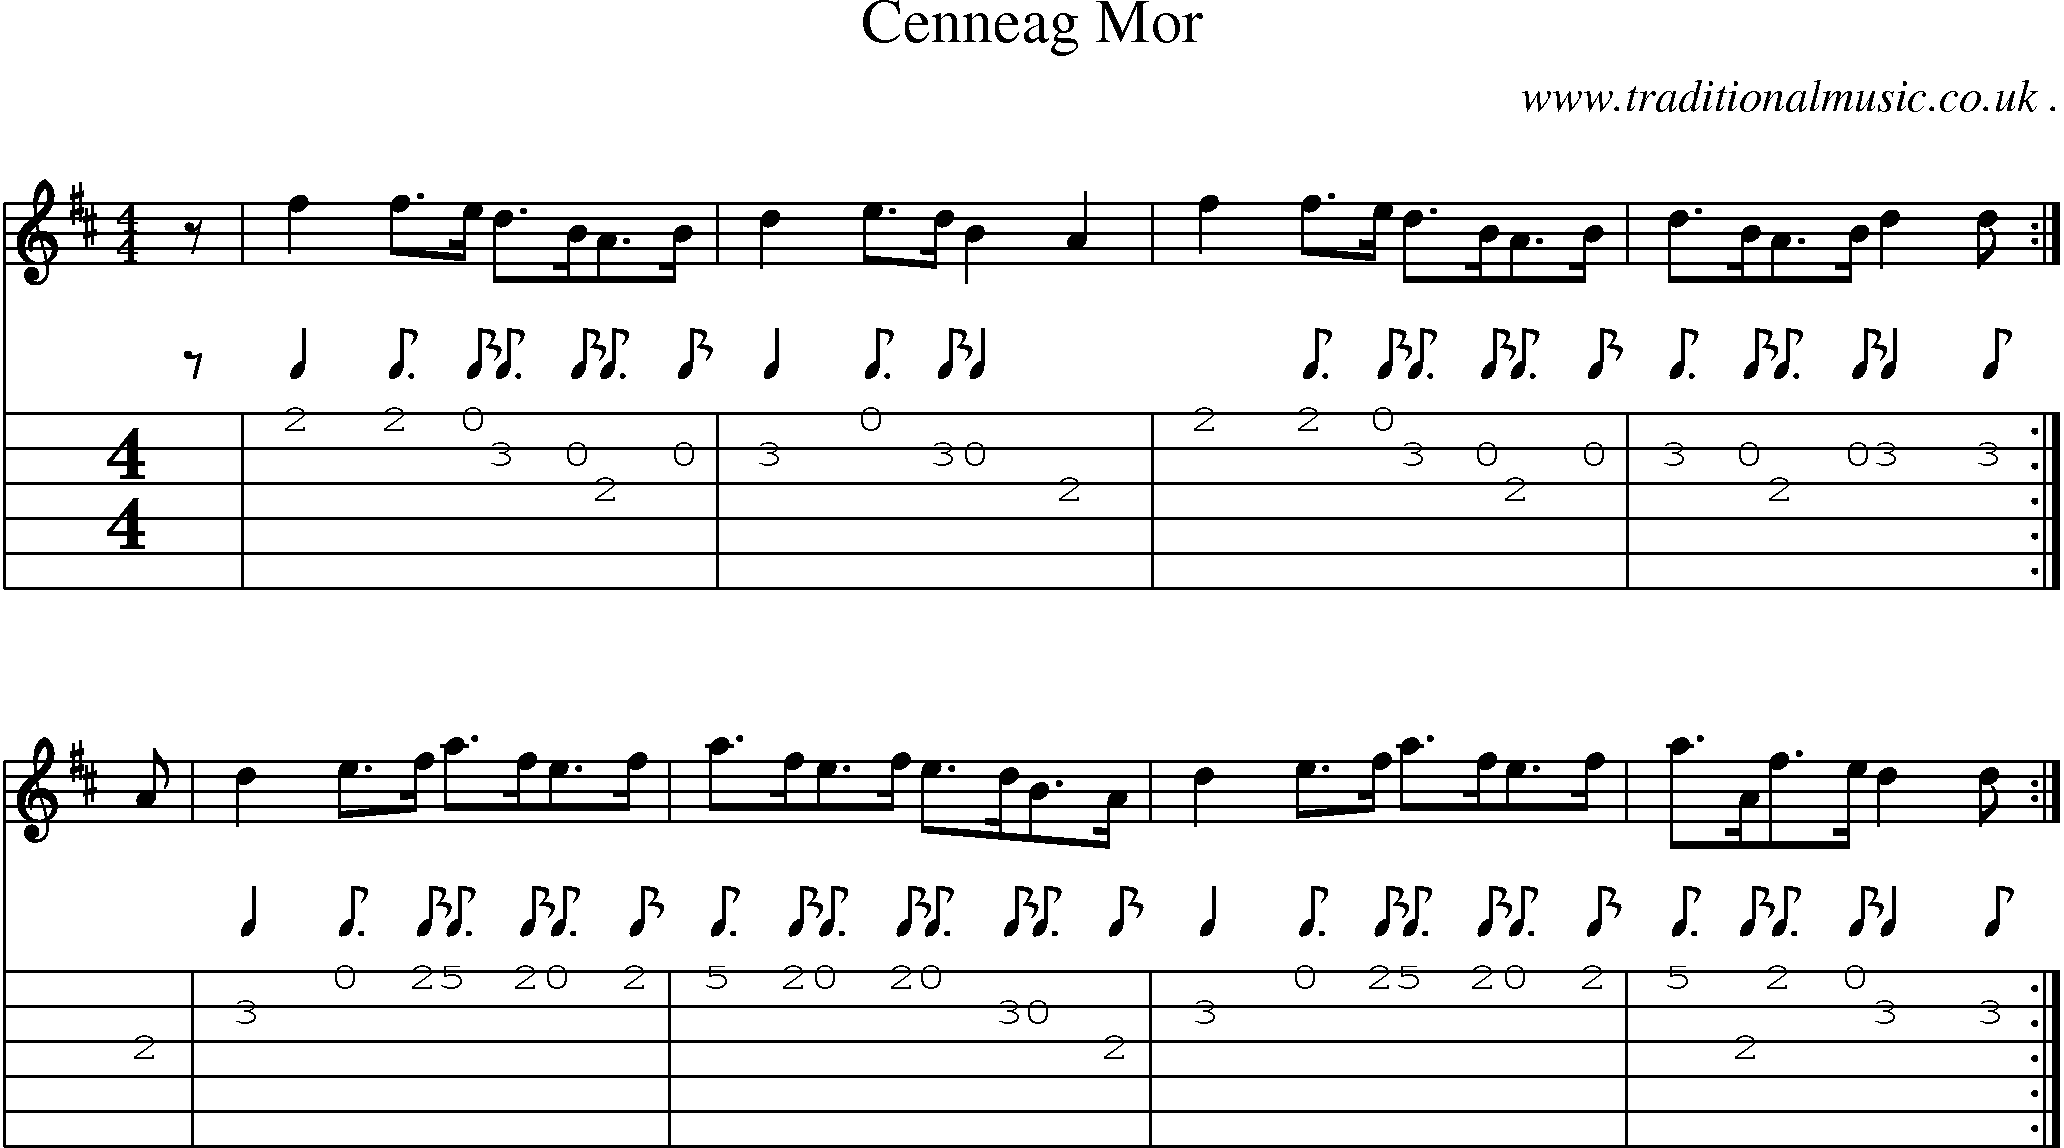 Sheet-music  score, Chords and Guitar Tabs for Cenneag Mor